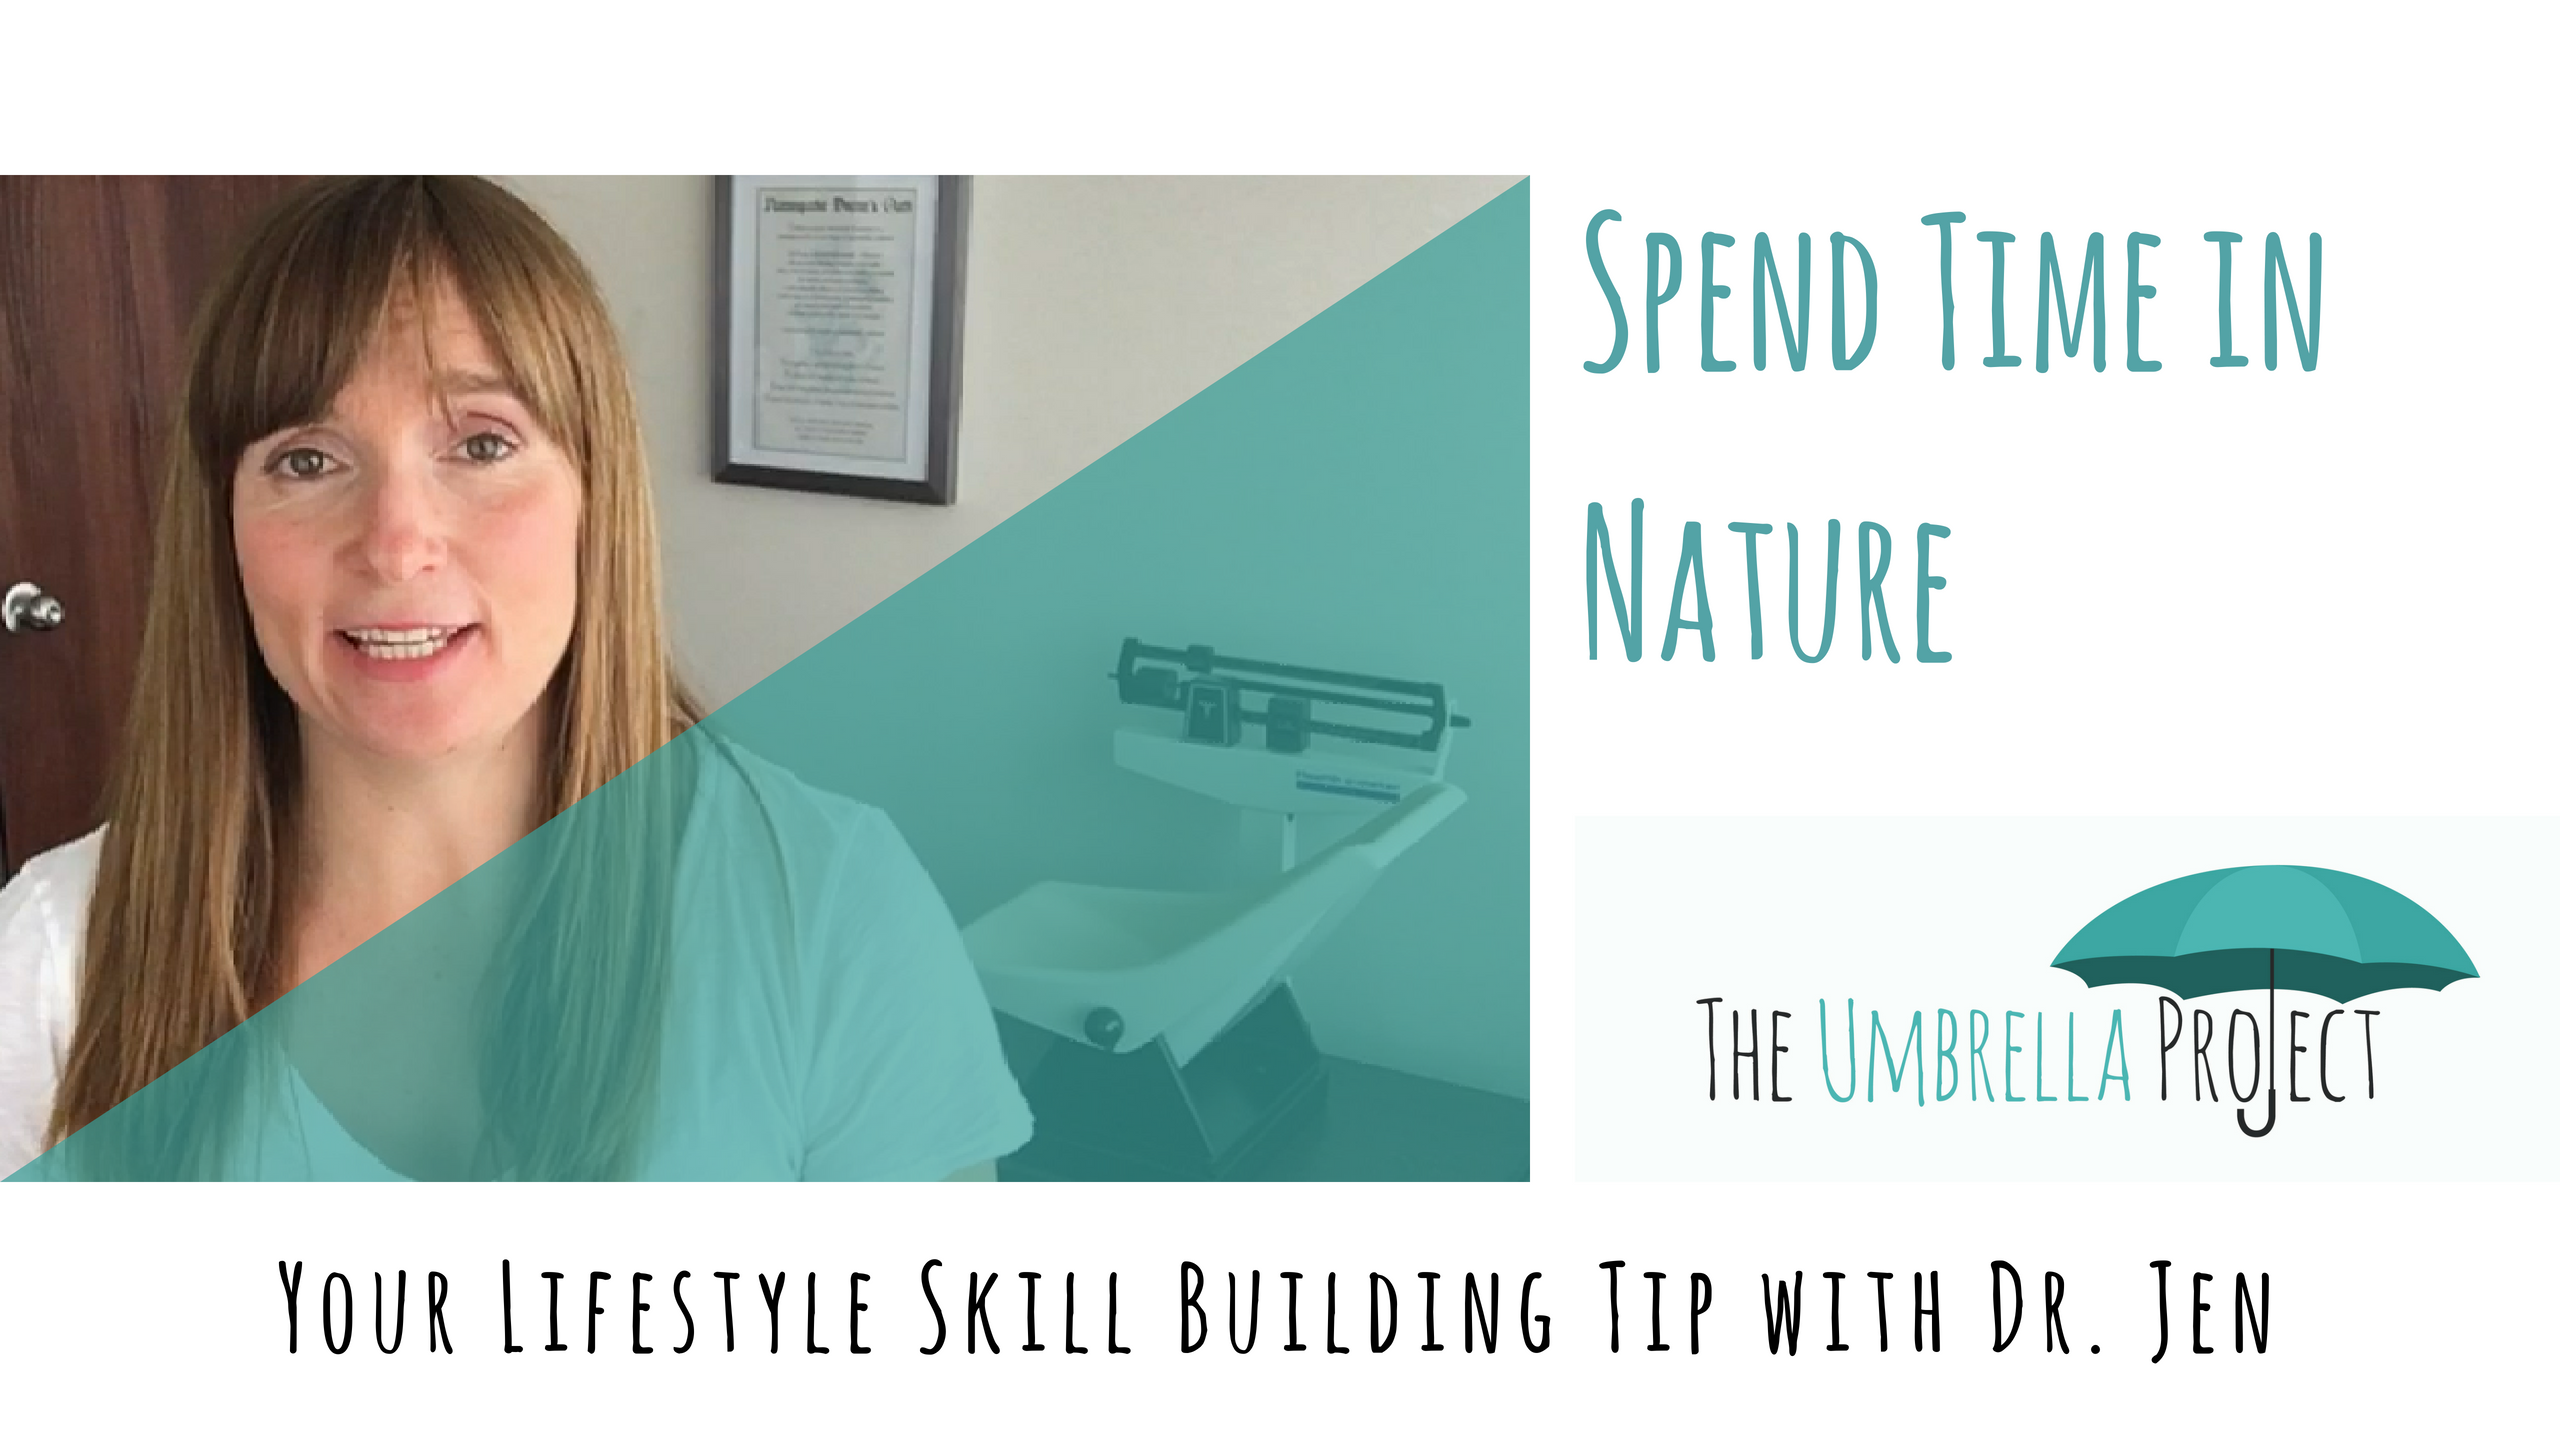 Spend Time in Nature: Your Lifestyle Skill Building Tip with Dr. Jen